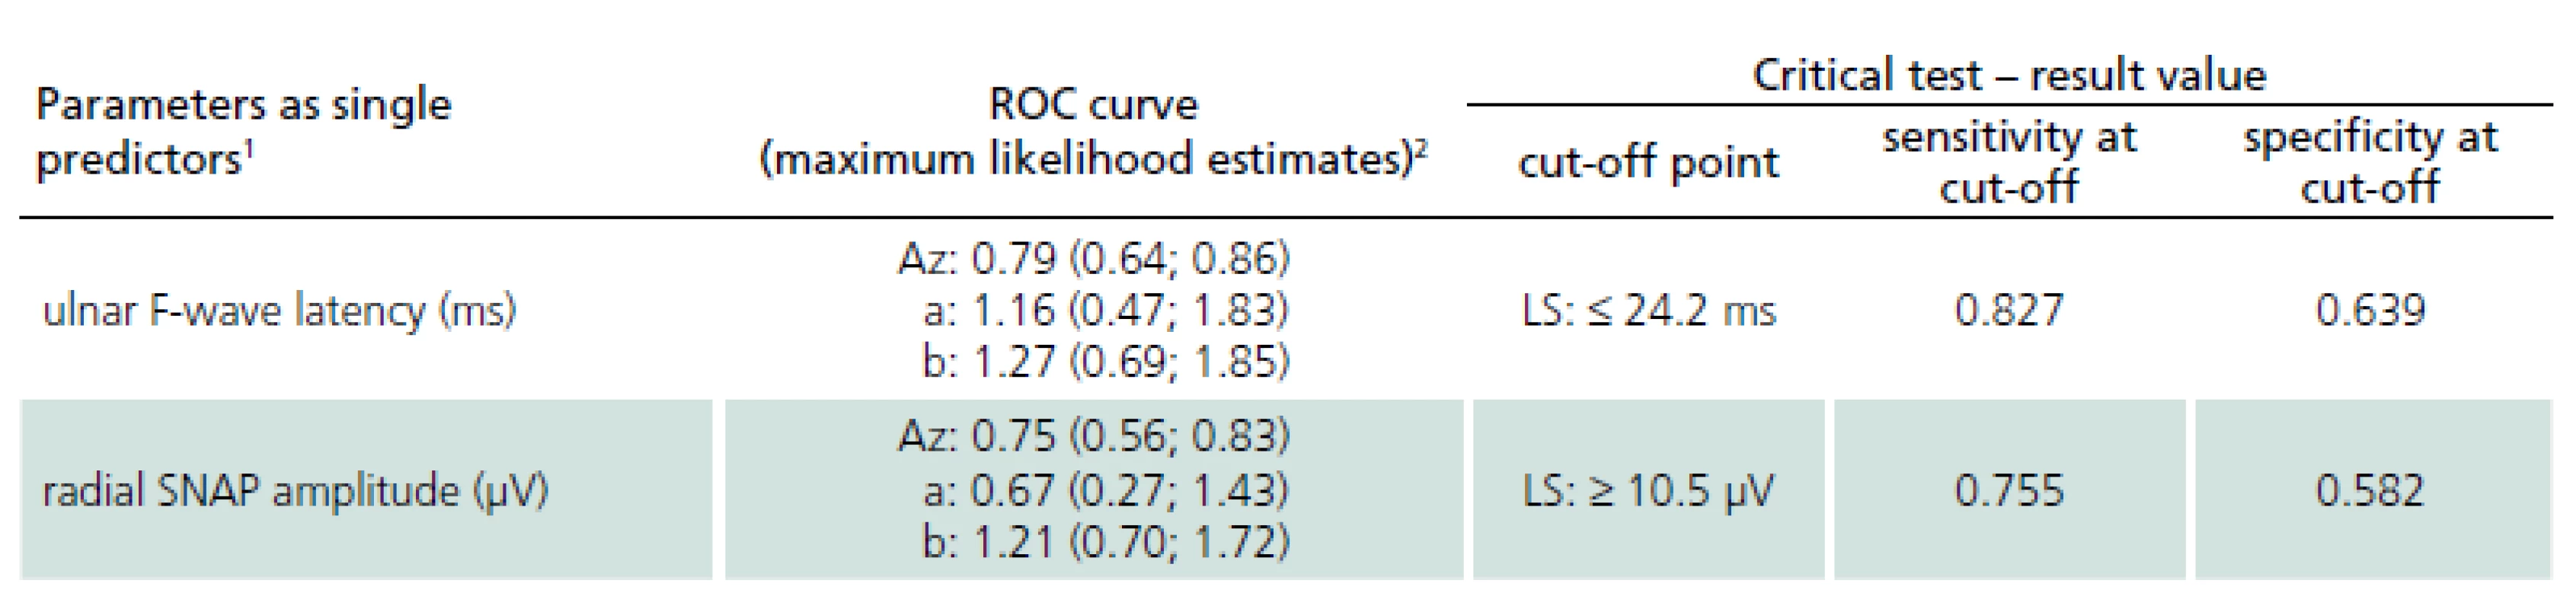 Electrophysiological parameters – cut-off values of single parameters based on the analysis of receiver operating characteristic (ROC) curves (LS vs DPN patients).